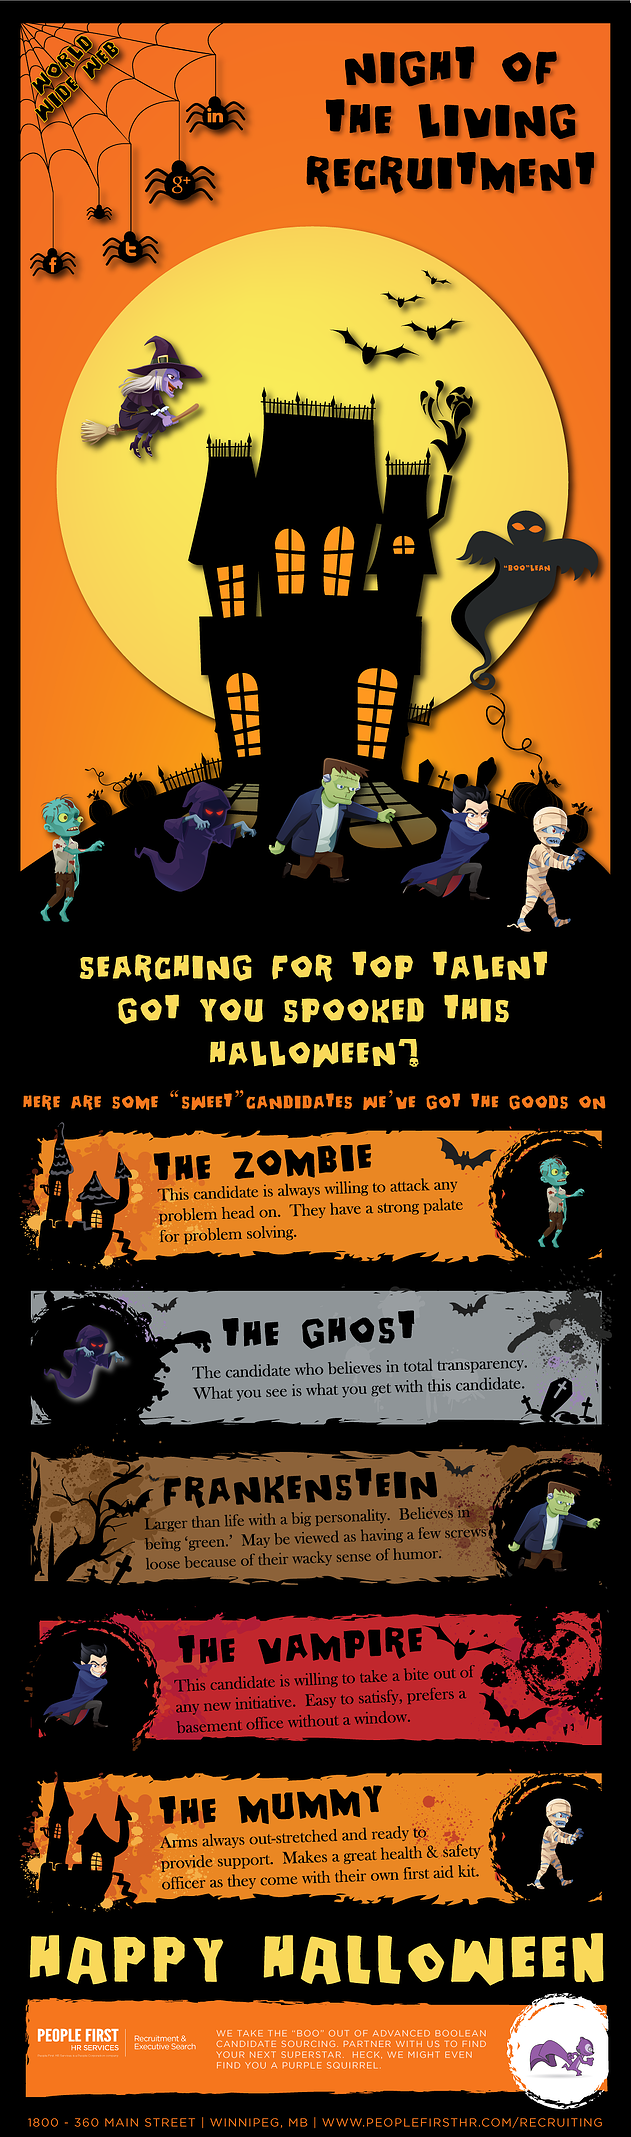 night of the living recruitment infographic people first recruitment